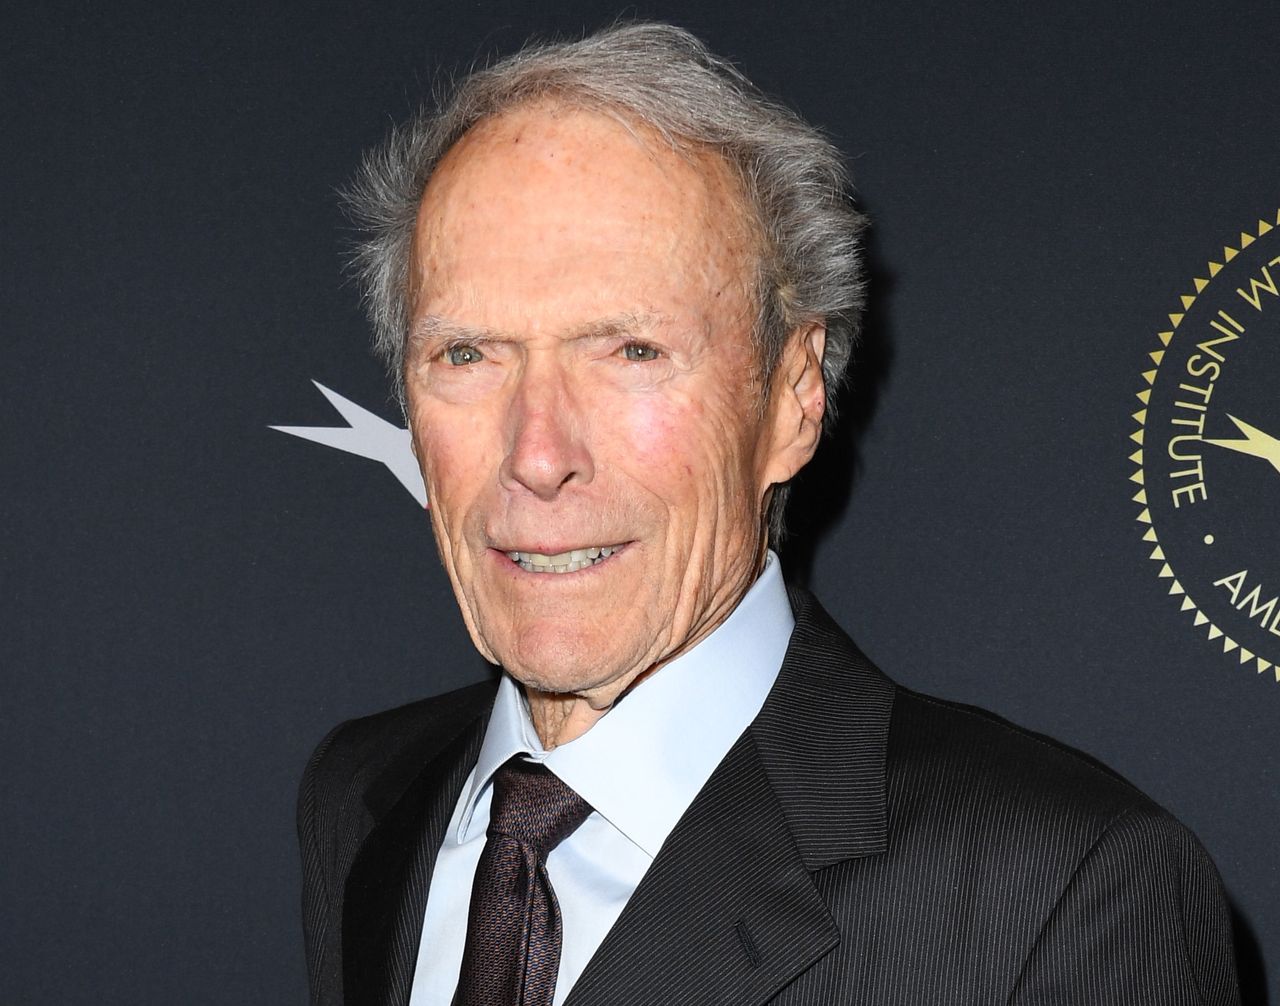 Clint Eastwood, 94, shines at Jane Goodall event, defies retirement